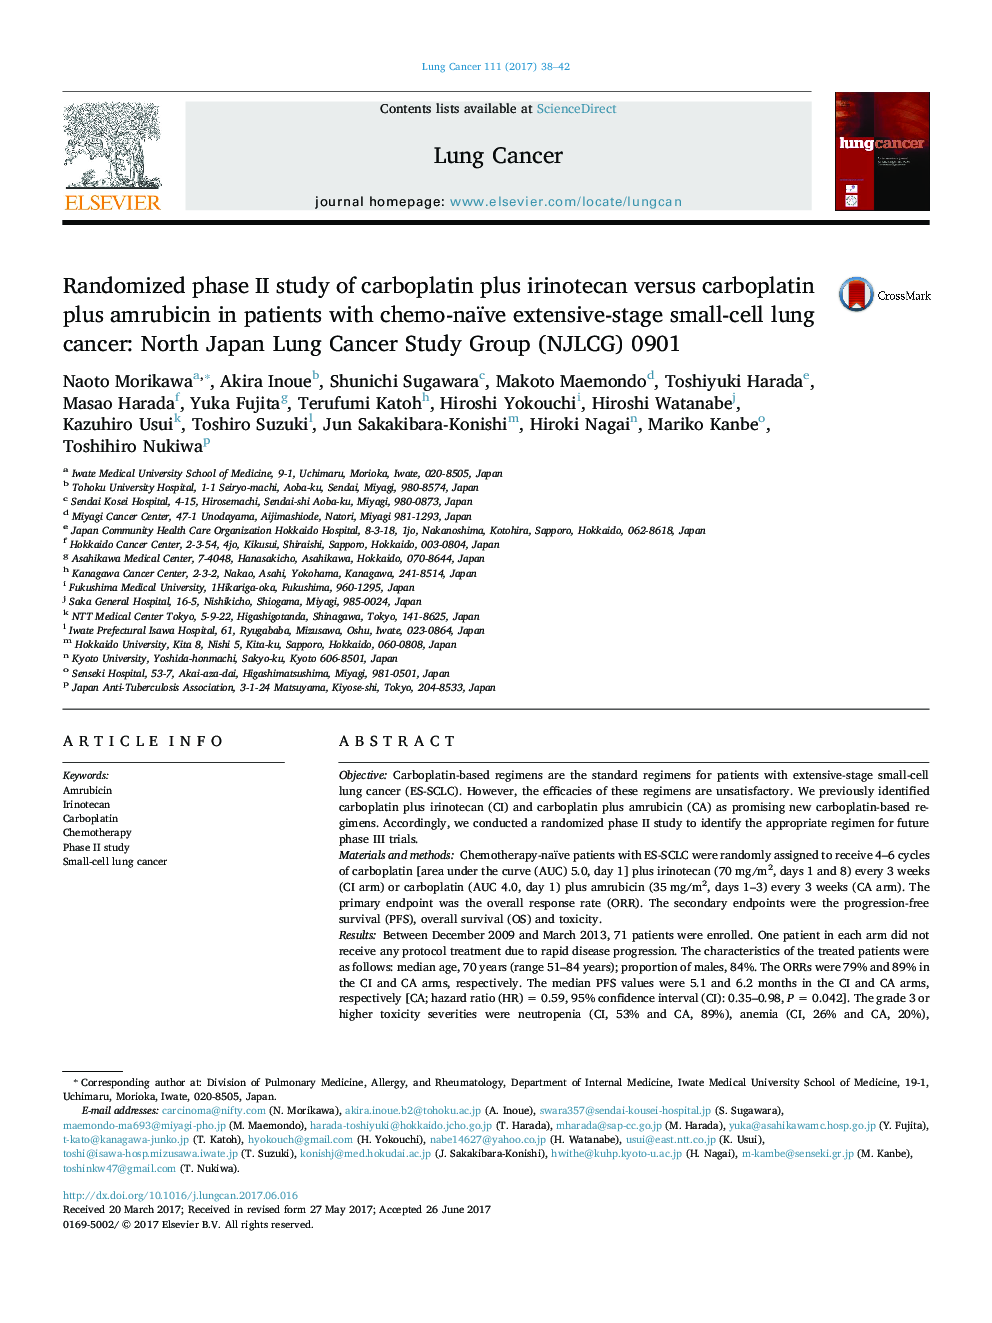 Randomized phase II study of carboplatin plus irinotecan versus carboplatin plus amrubicin in patients with chemo-naïve extensive-stage small-cell lung cancer: North Japan Lung Cancer Study Group (NJLCG) 0901